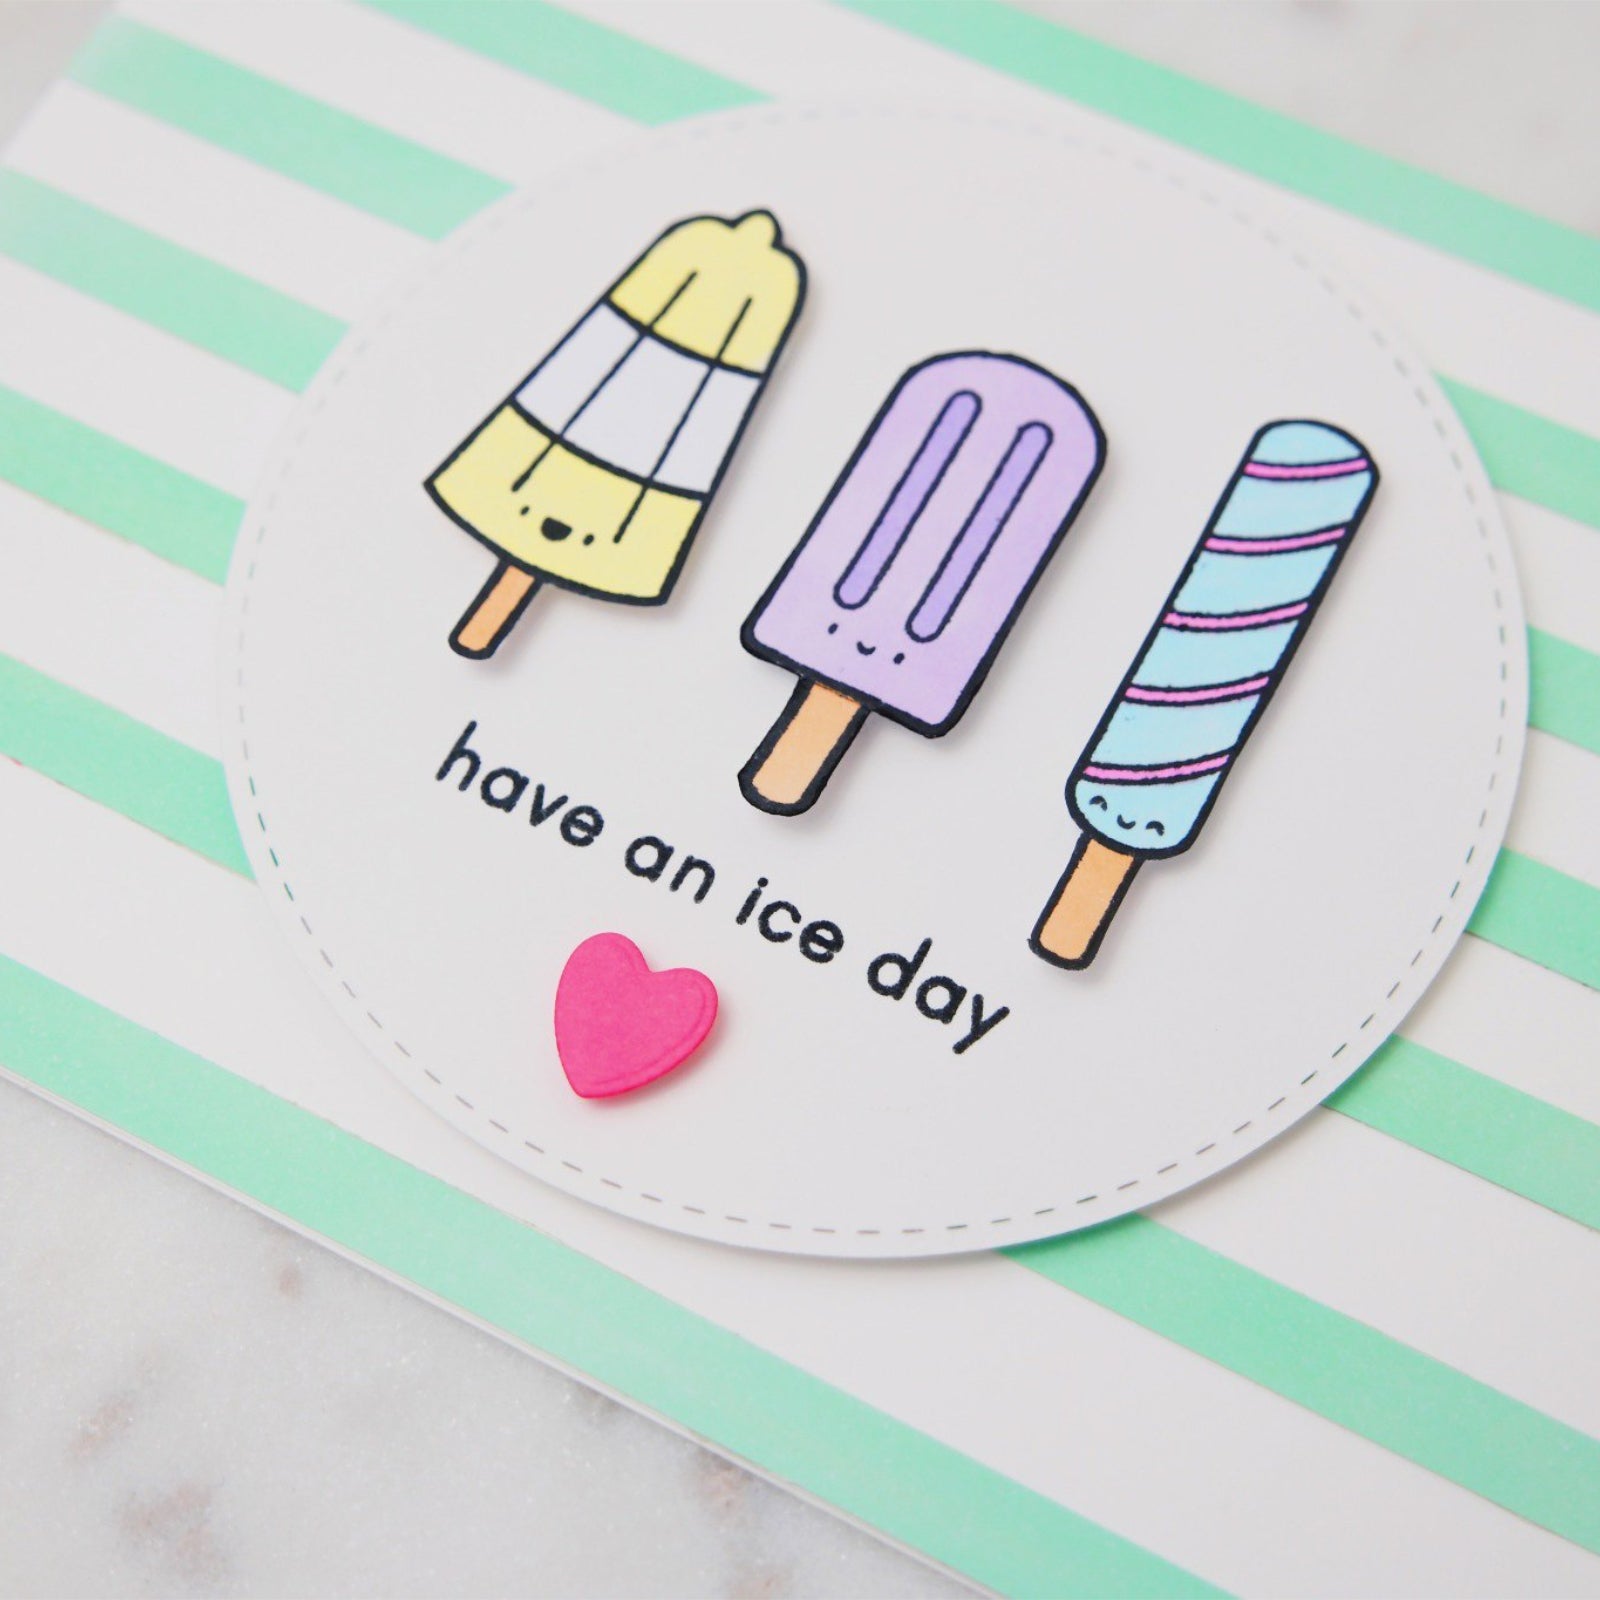 Anything is Popsicle Icy Treats Cutting Dies & Stamps Set